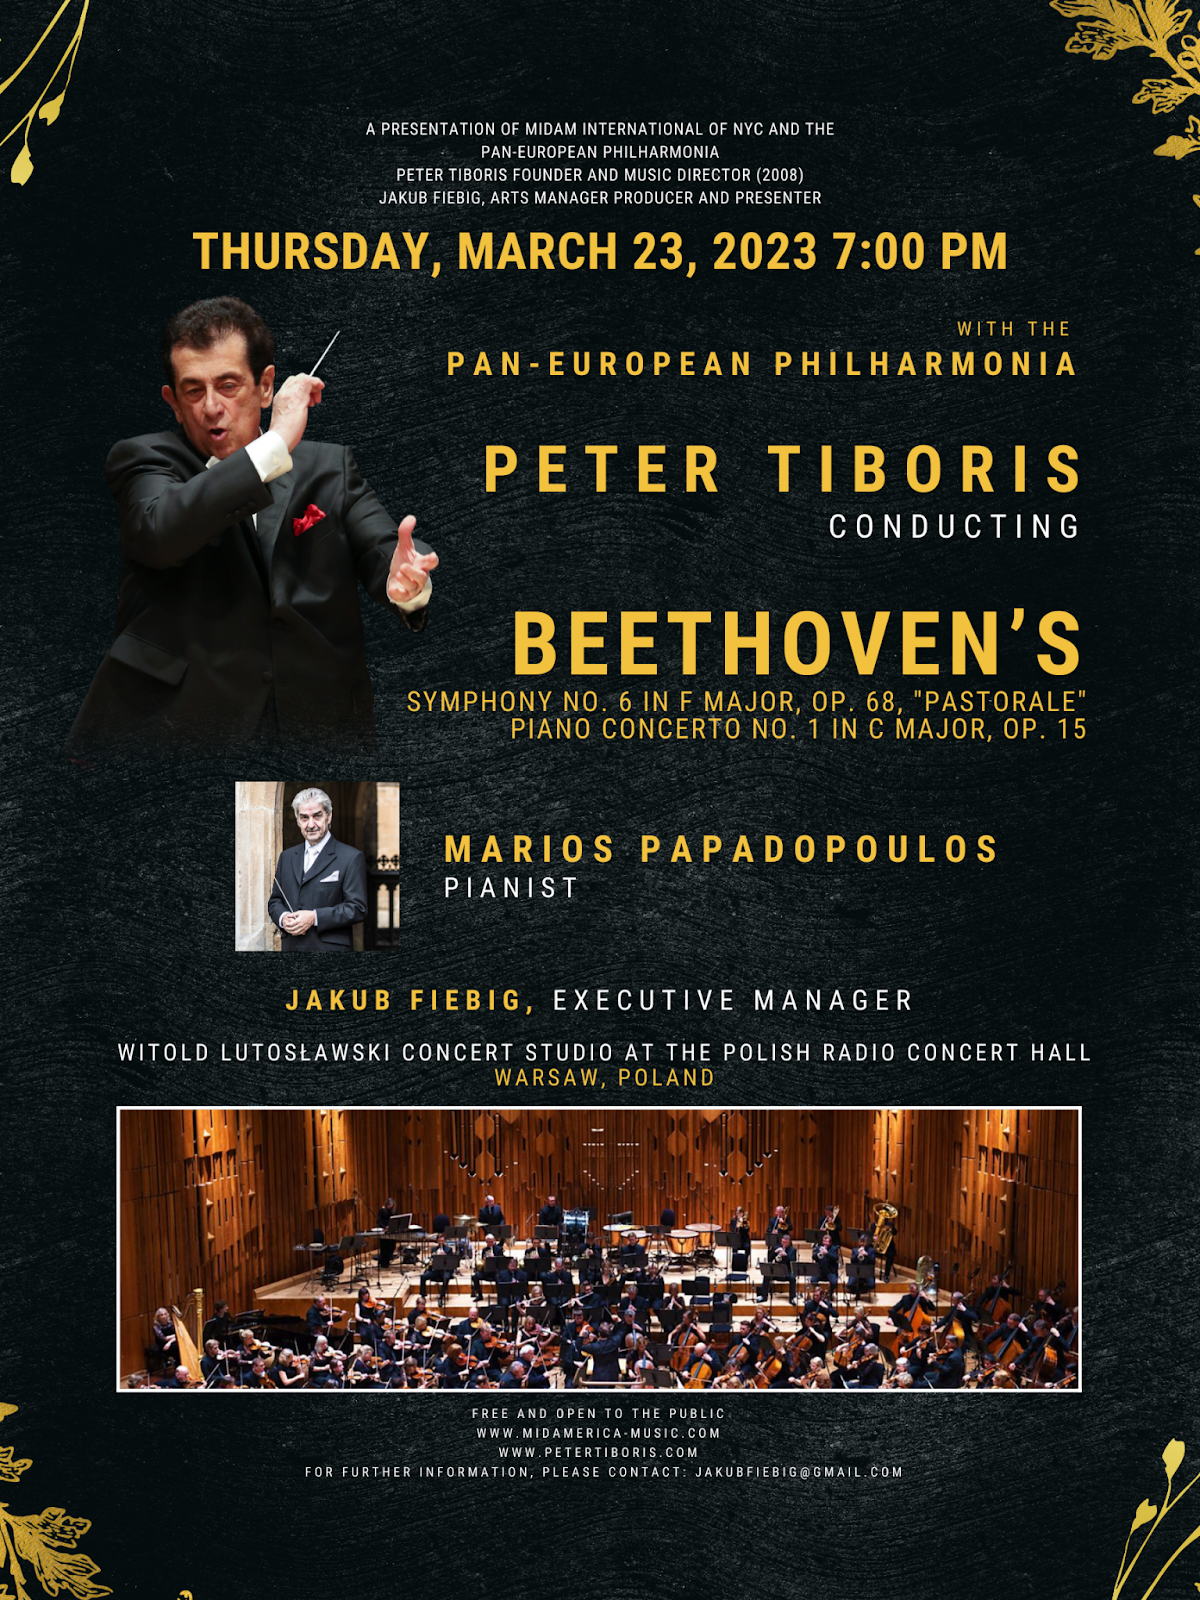 Maestro Peter Tiboris to Lead The Pan-European Philharmonia In An All-Beethoven Concert In Warsaw 